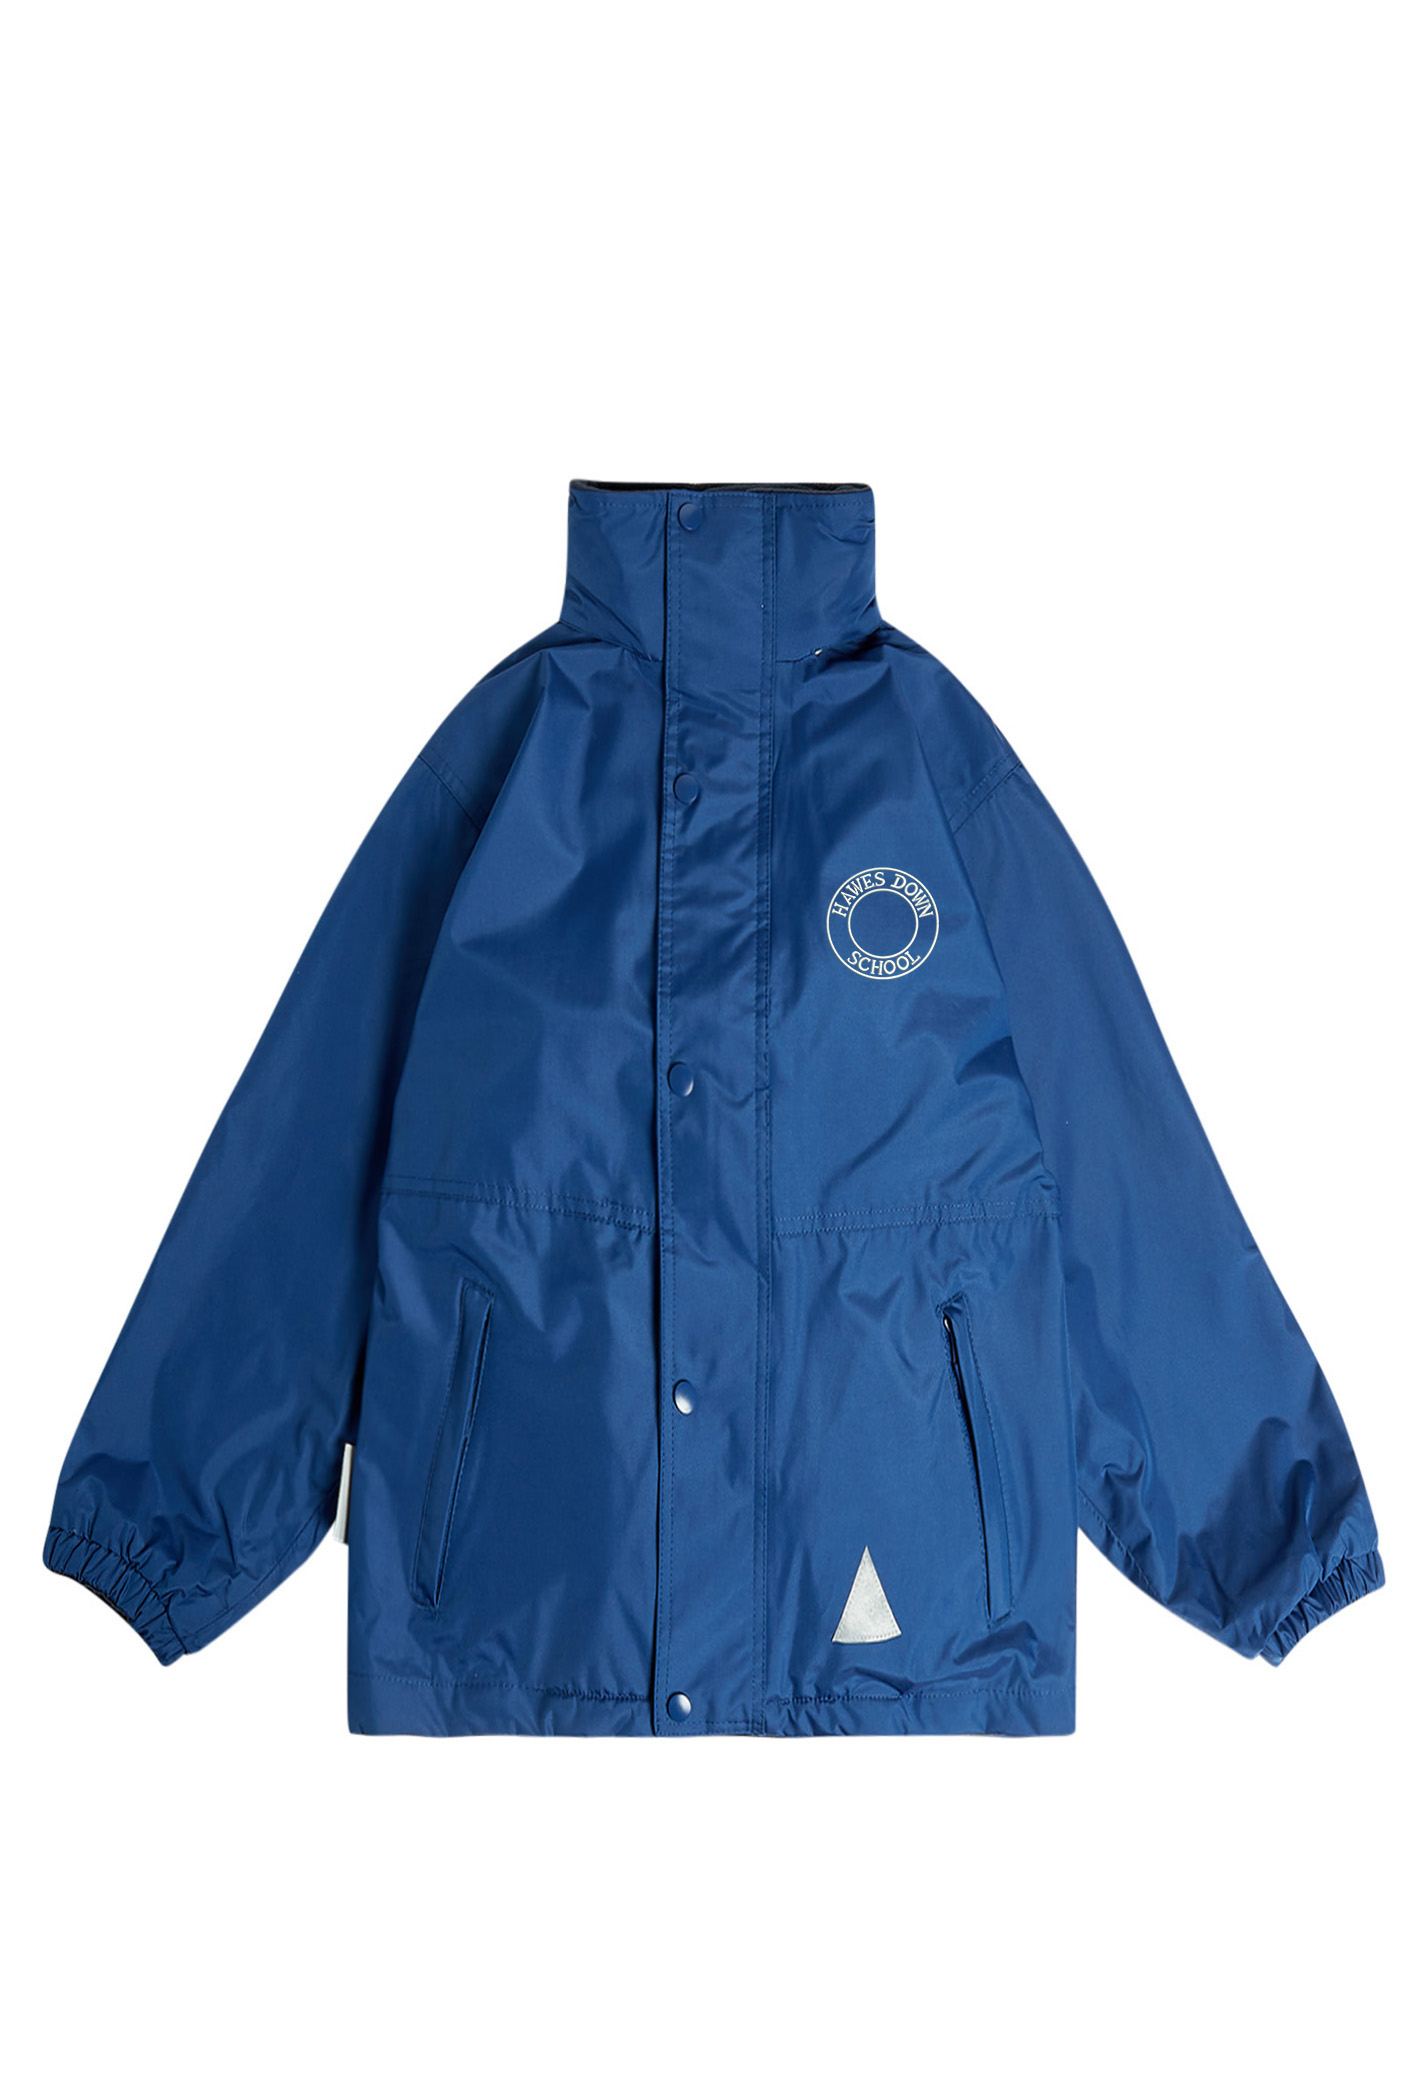 Hawes Down Primary School Embroidered Jkt